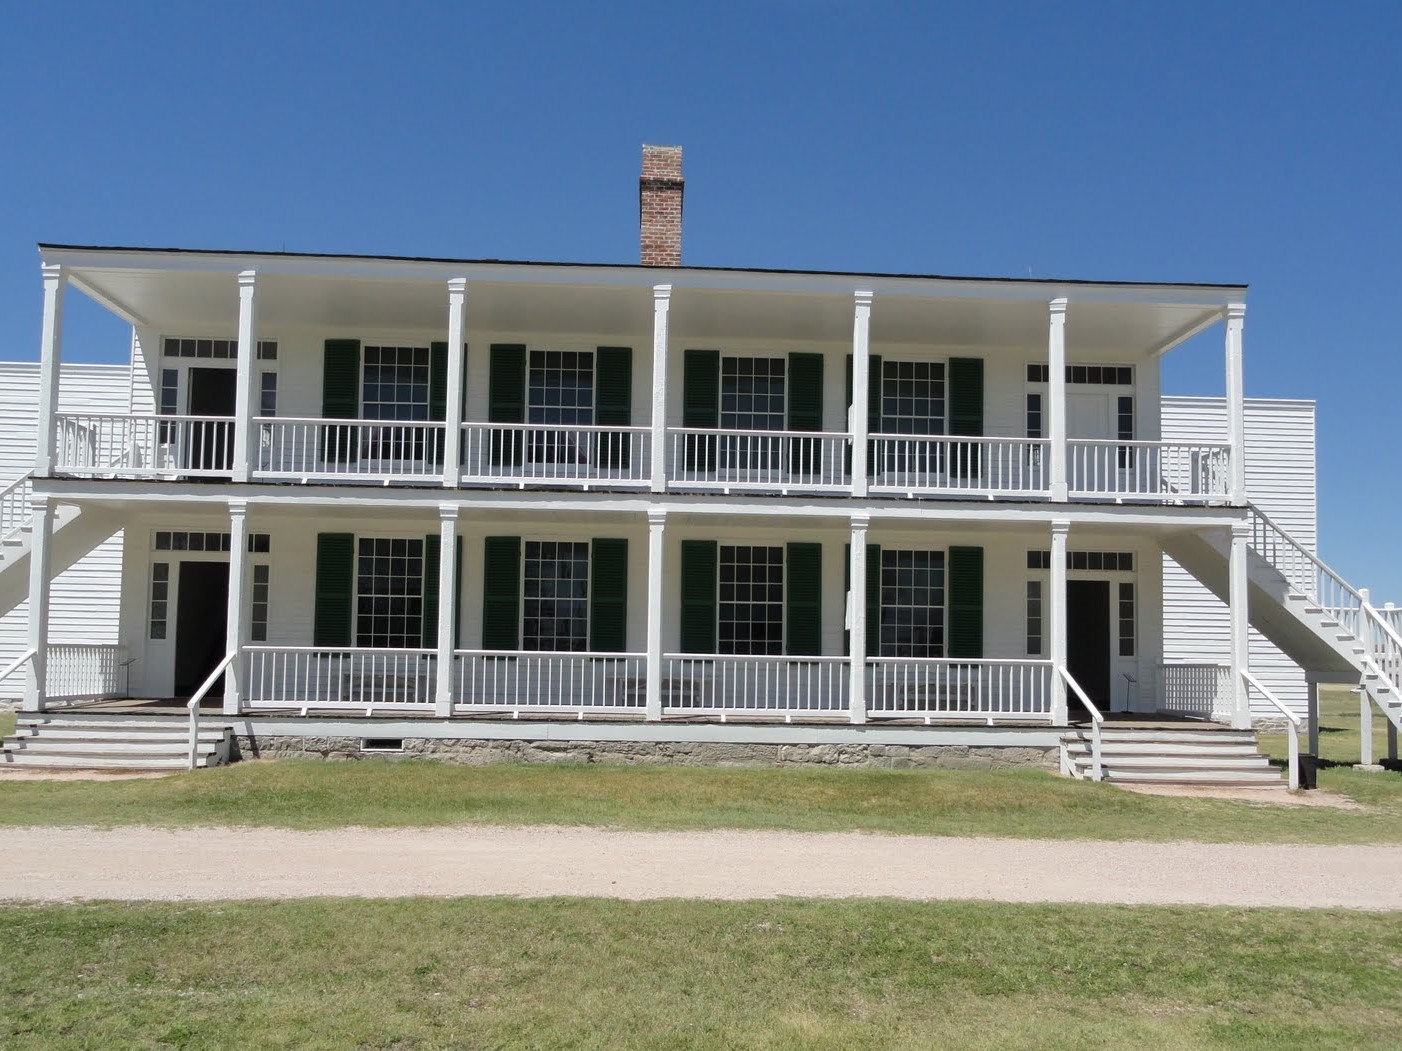 Fort Laramie | Then and Now